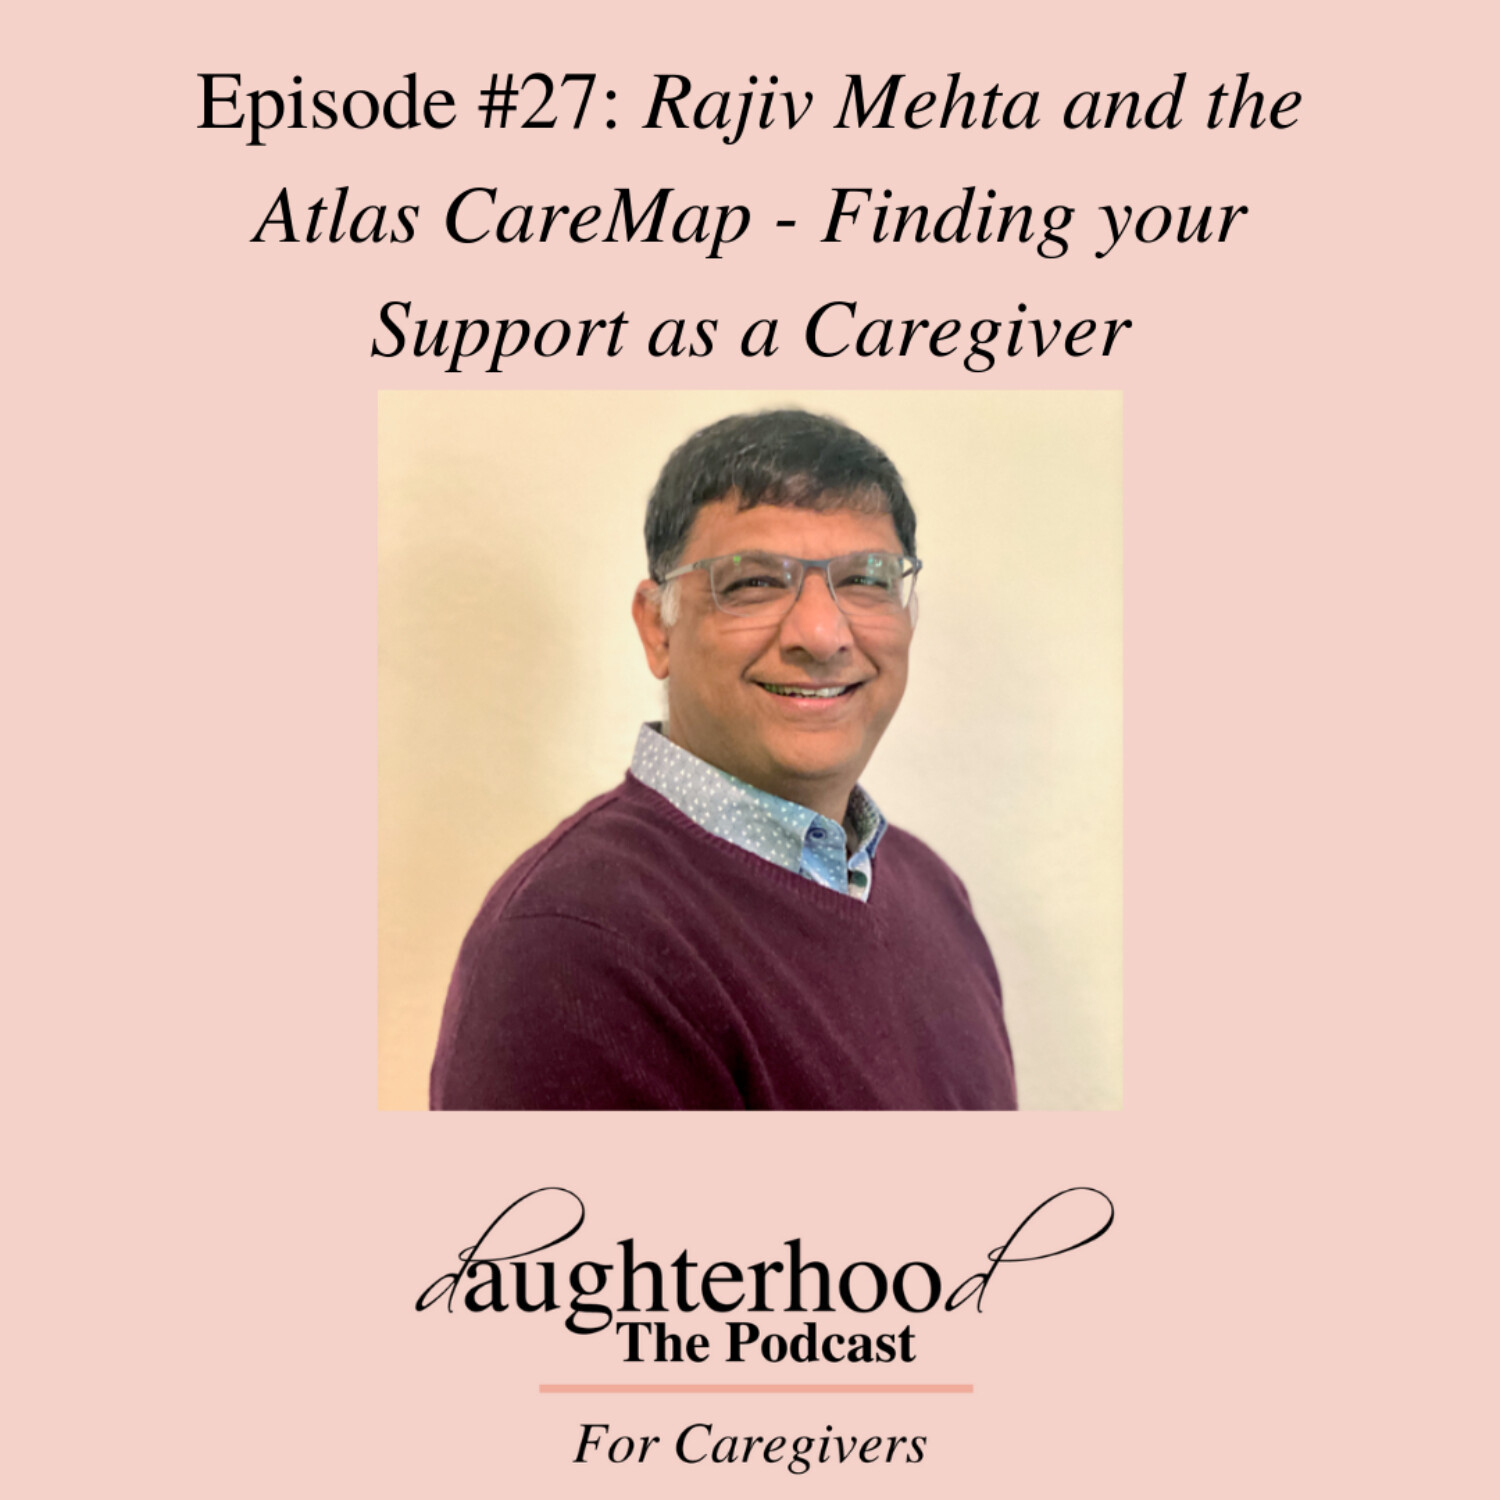 Rajiv Mehta and the Atlas Care Map - Finding your support as a caregiver